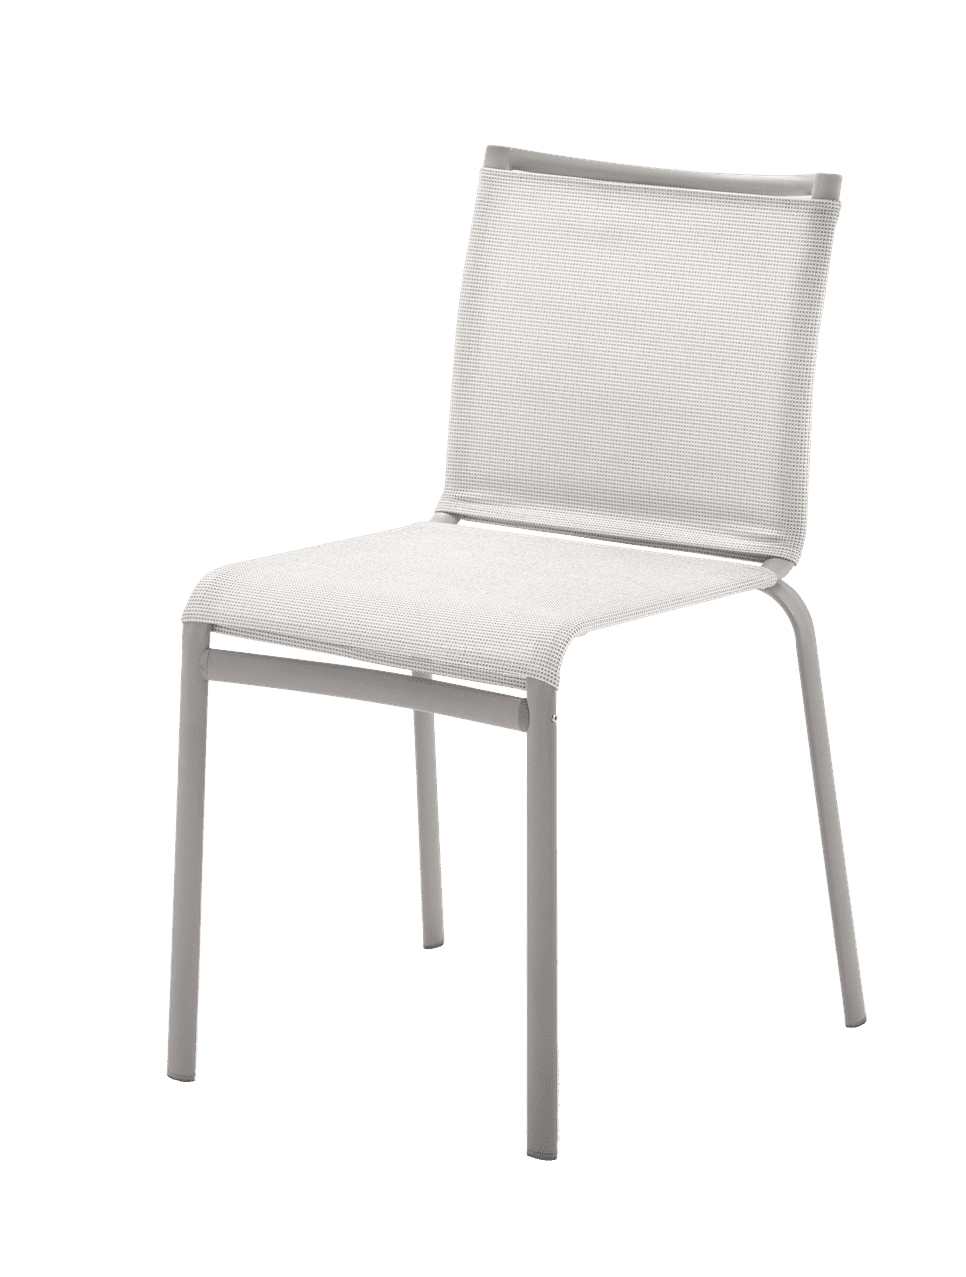 Net Stackable chair with lacquered or chromemMetal frame